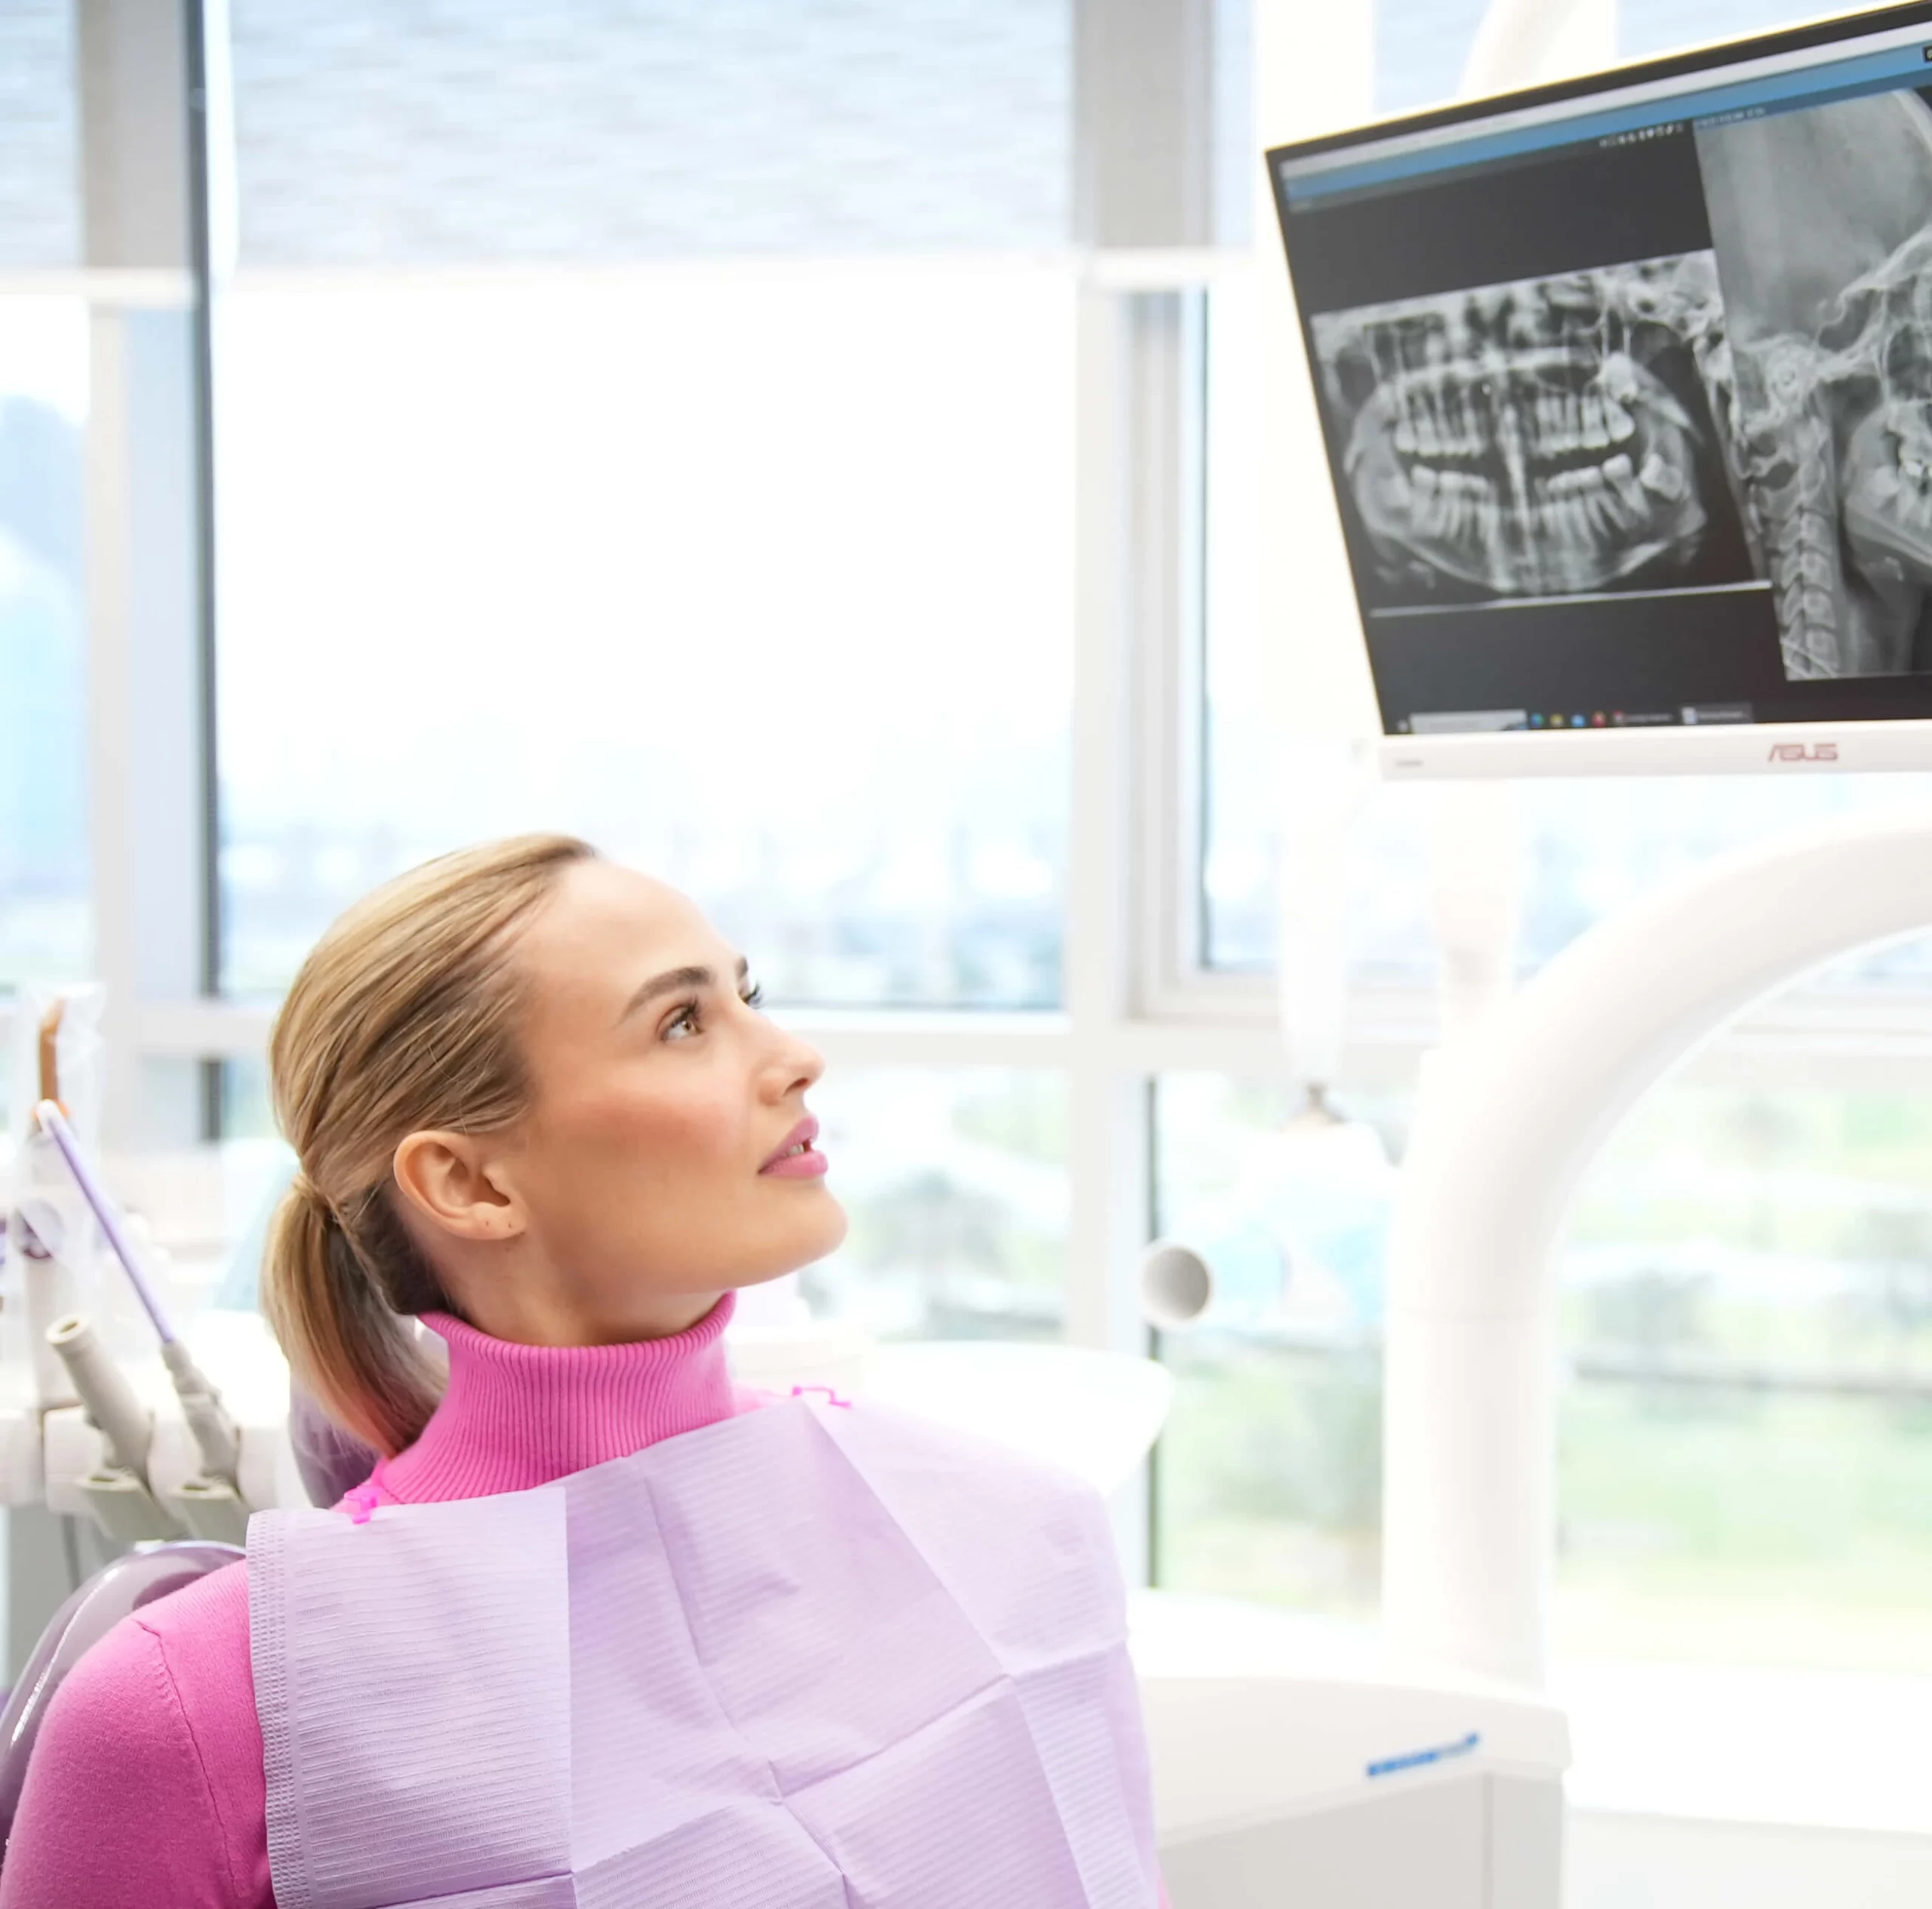 Patient observing her dental X-ray on the screen while the dentist discusses a misaligned tooth.